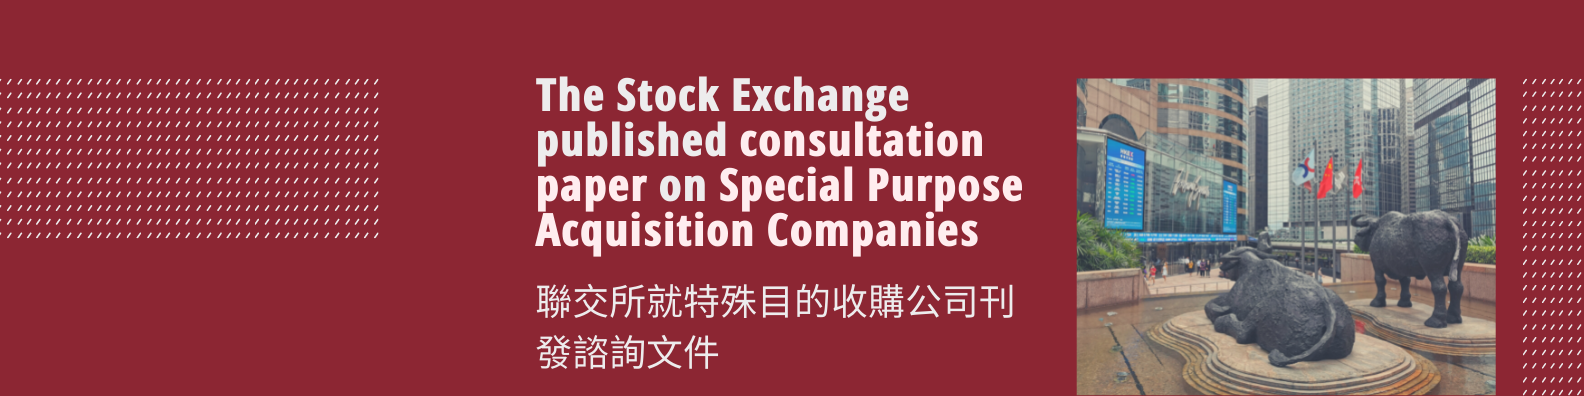 The Stock Exchange published consultation paper on Special Purpose Acquisition Companies